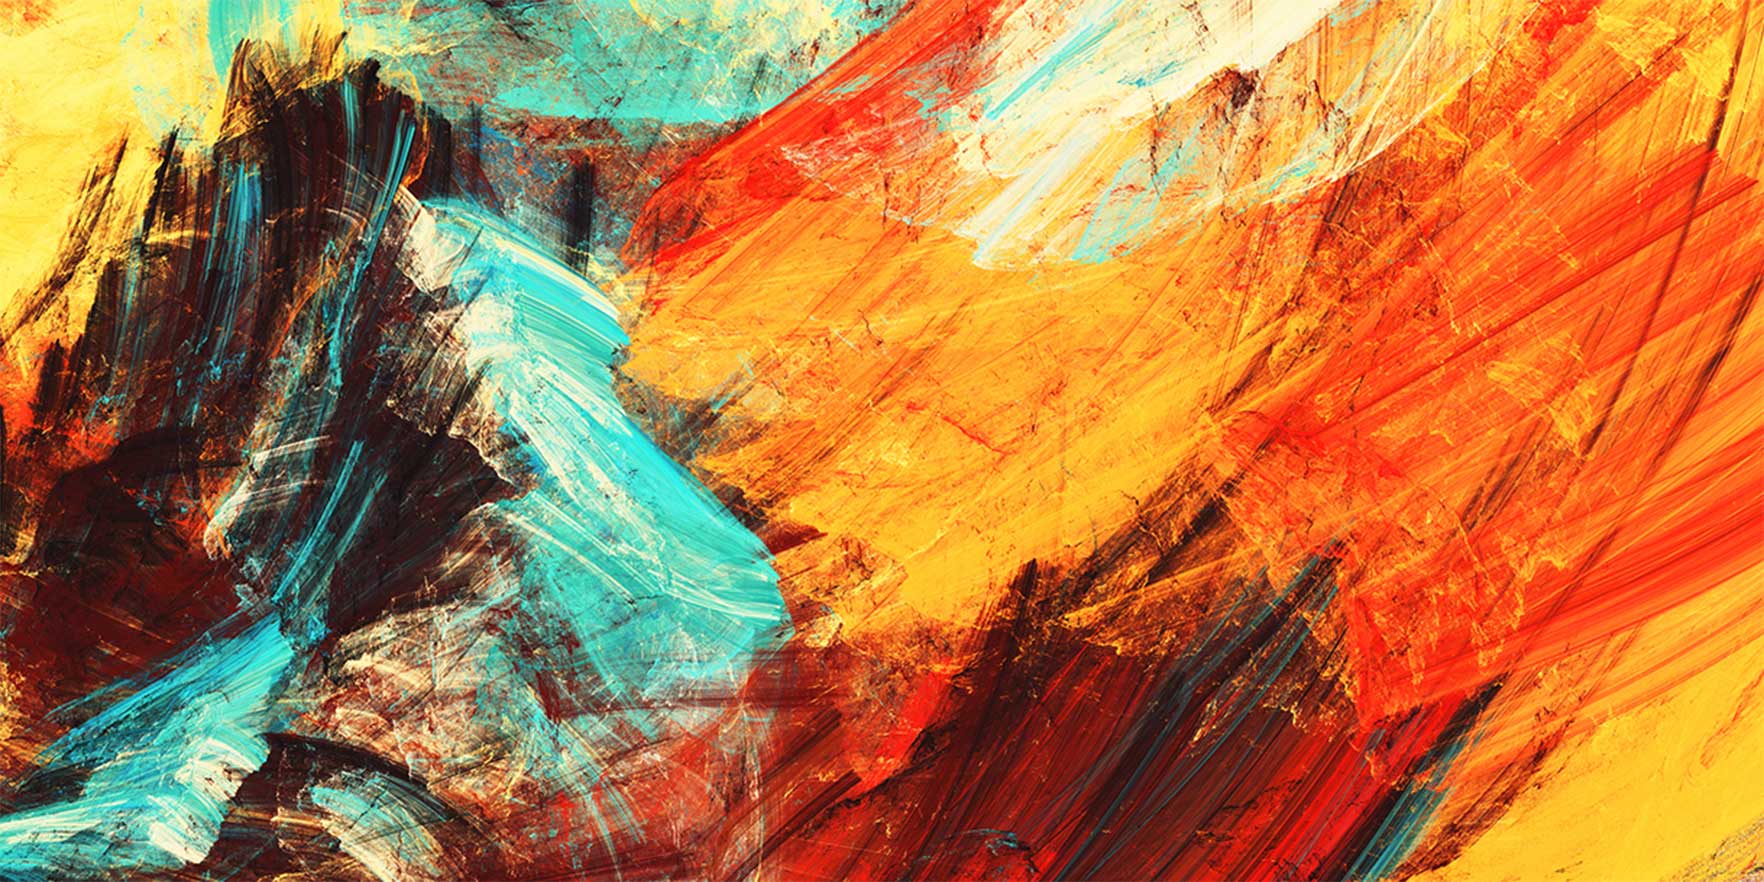 Quadro panorâmico - Abstract orange and teal